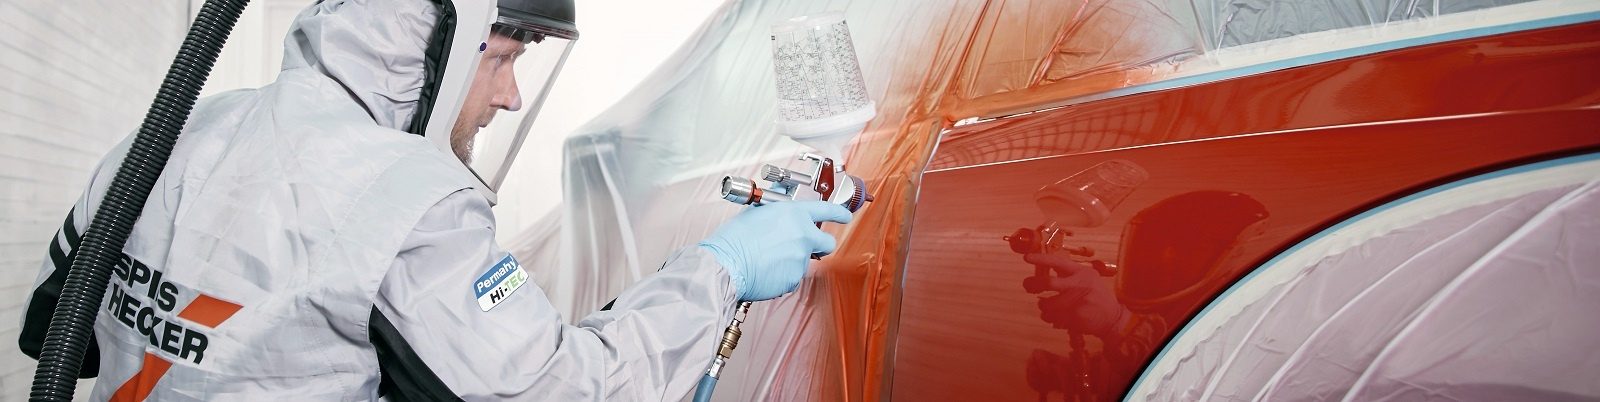 Spies Hecker is one of the largest suppliers of car refinish paint.